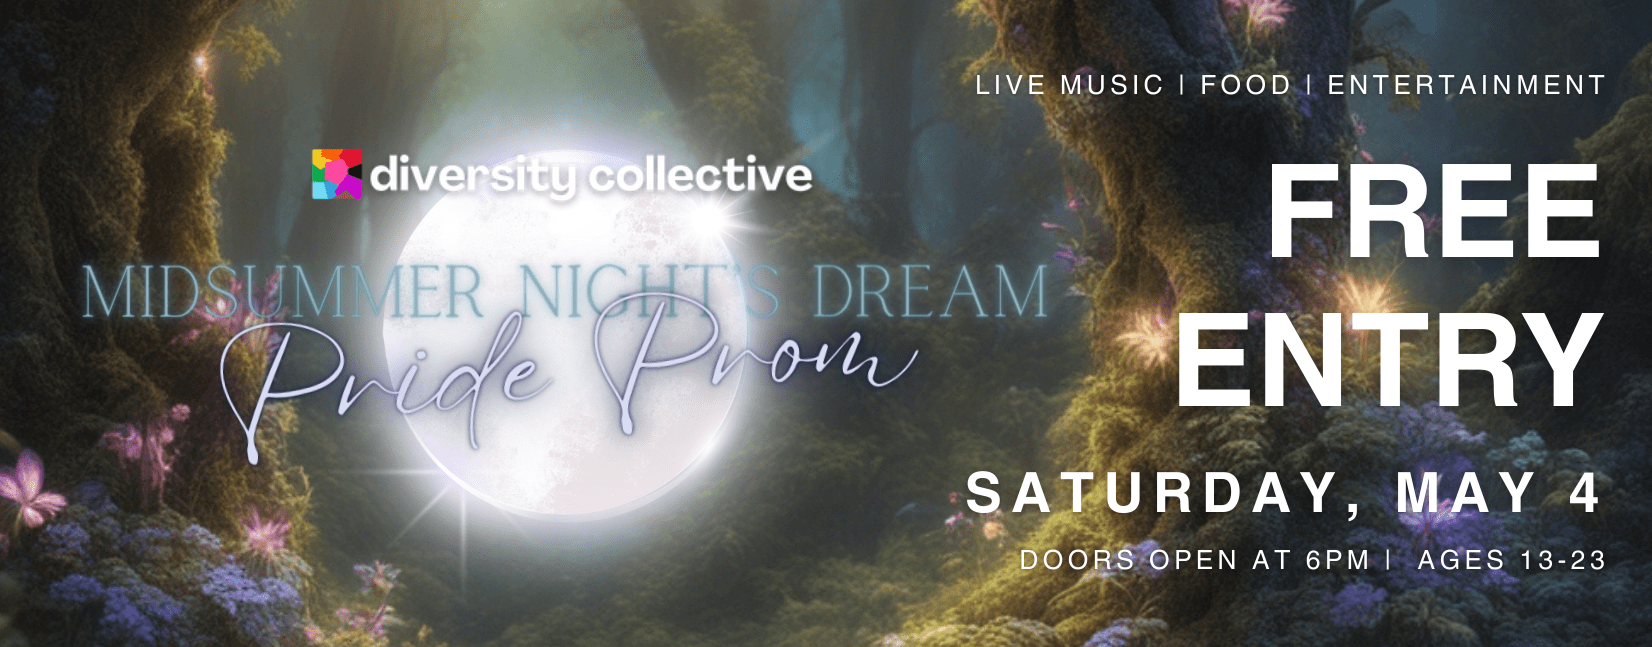 Promotional banner for midsummer night's dream pride prom by diversity collective, featuring live music and entertainment details with "free entry" highlighted, set against a mystical forest backdrop.